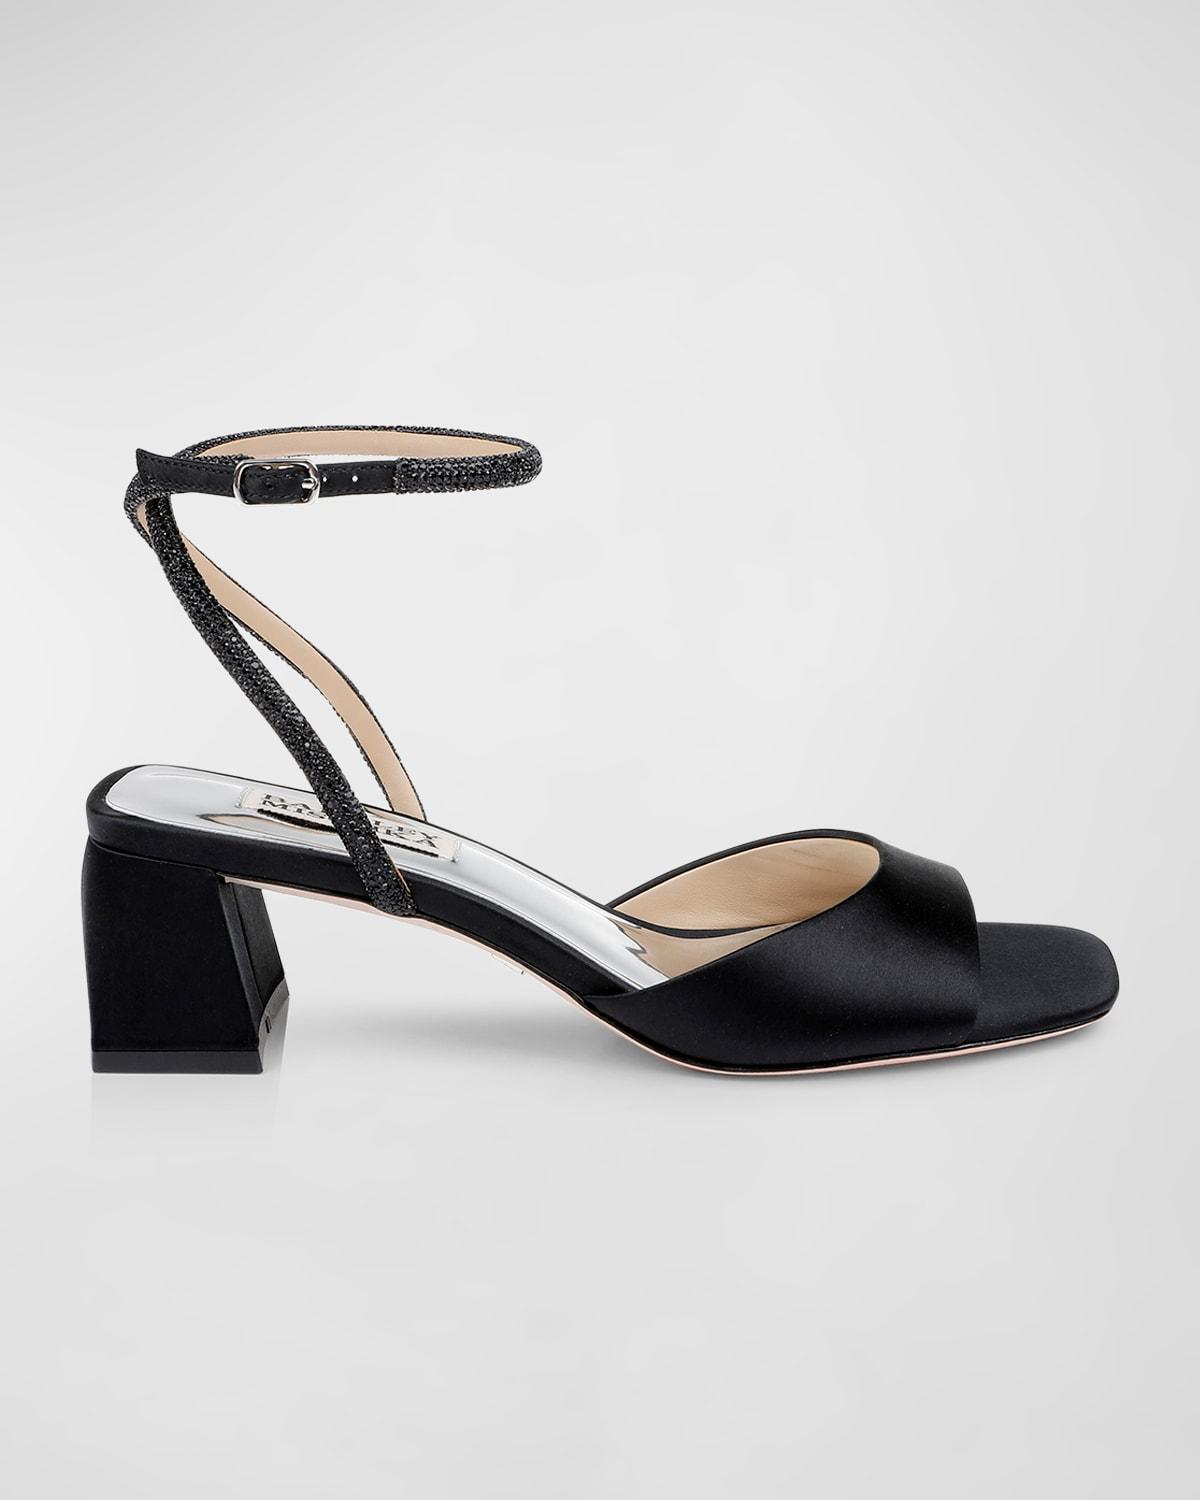 Badgley Mischka Collection Infinity Ankle Strap Sandal Product Image